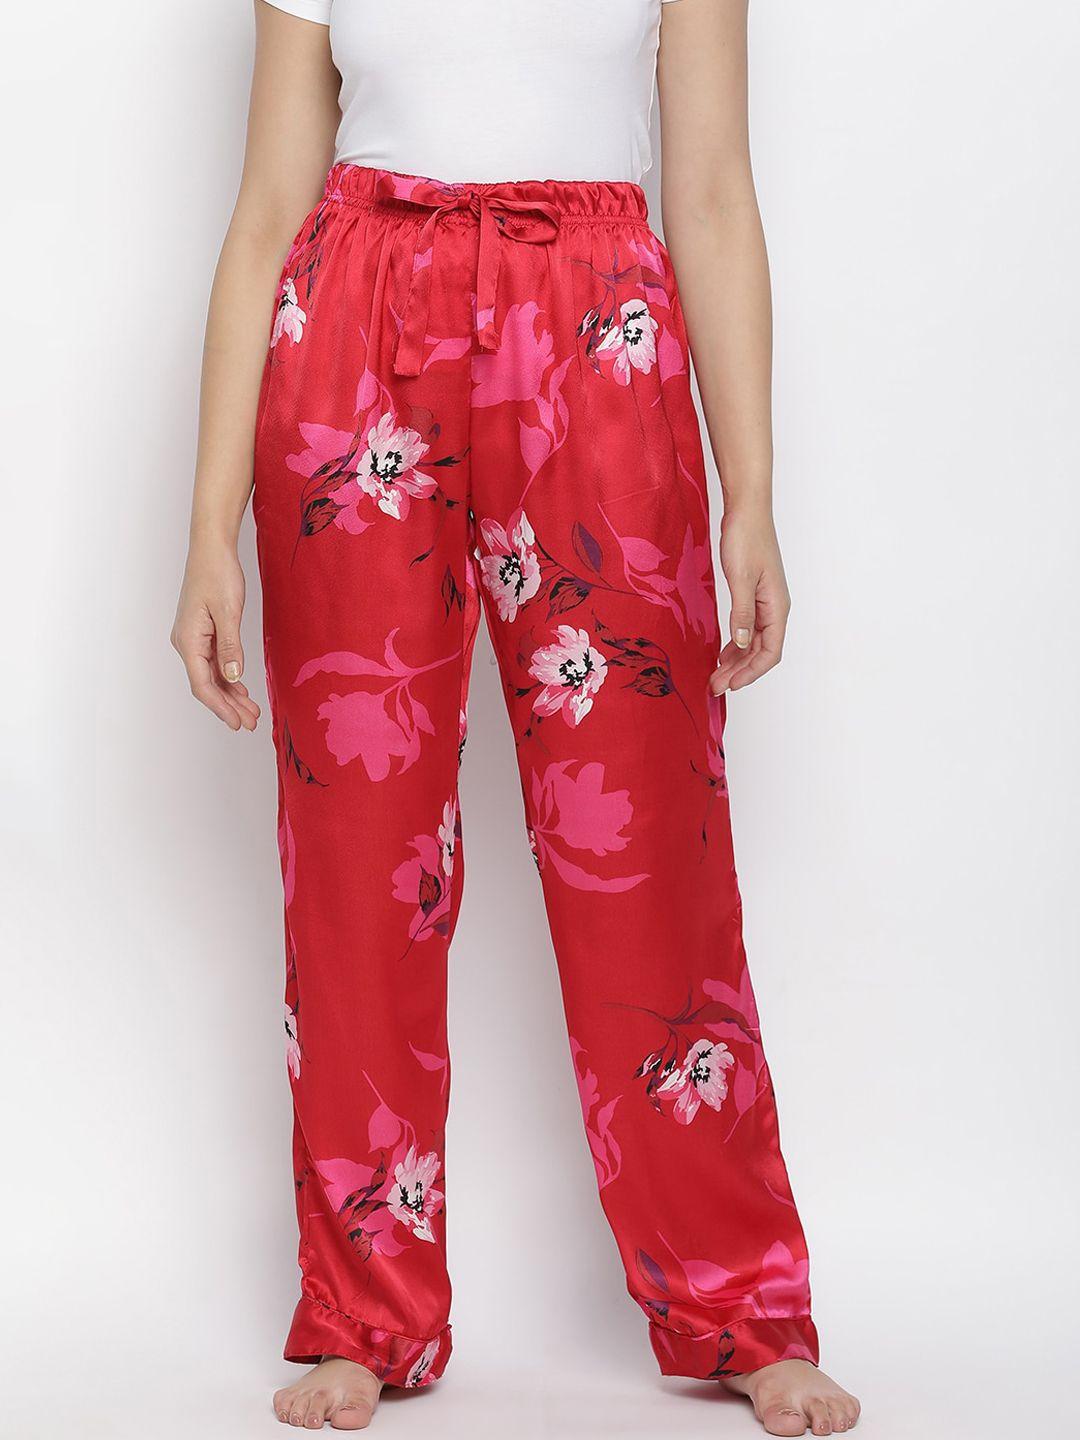 oxolloxo women red printed lounge pant